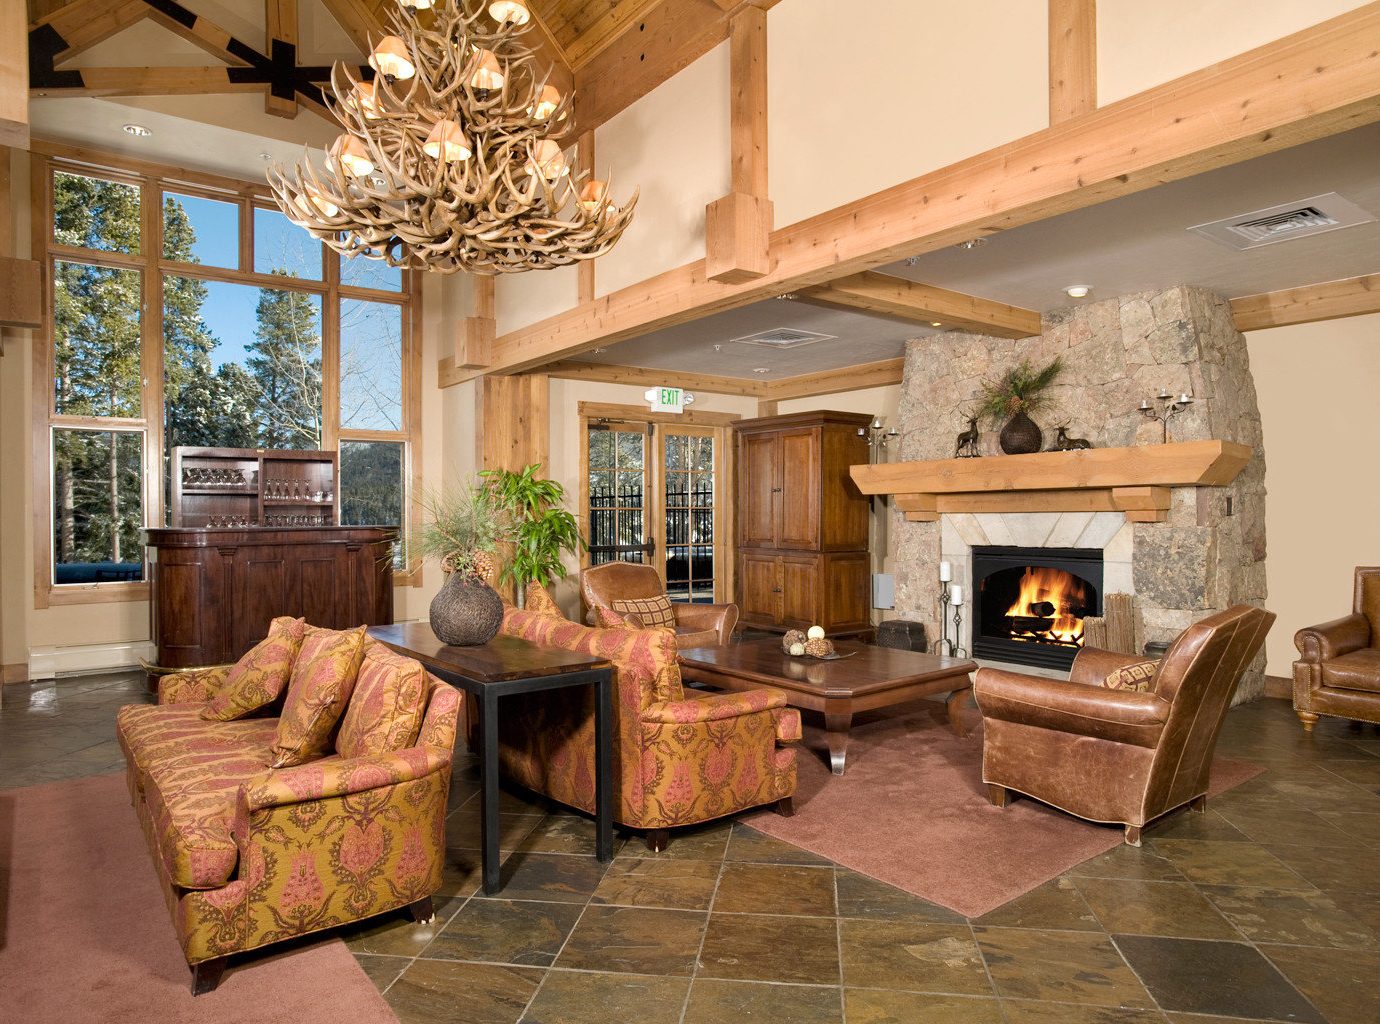 Bar Fireplace Lodge Lounge Rustic Scenic views sofa living room property home fire house hardwood cottage mansion Villa farmhouse wood flooring